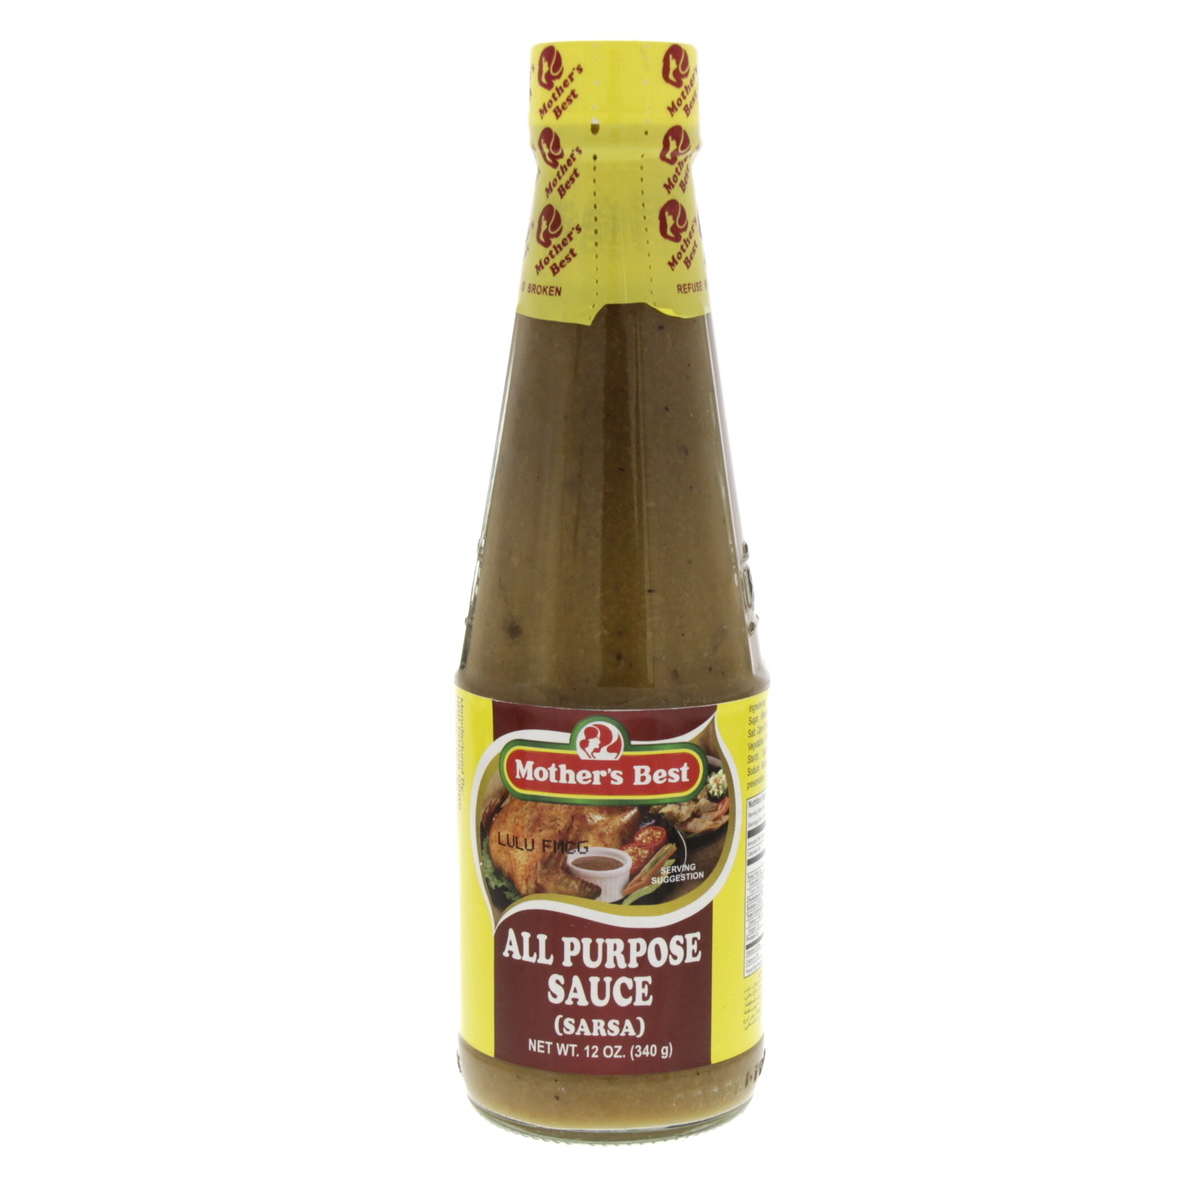 Mother's Best All Purpose Sauce 340g